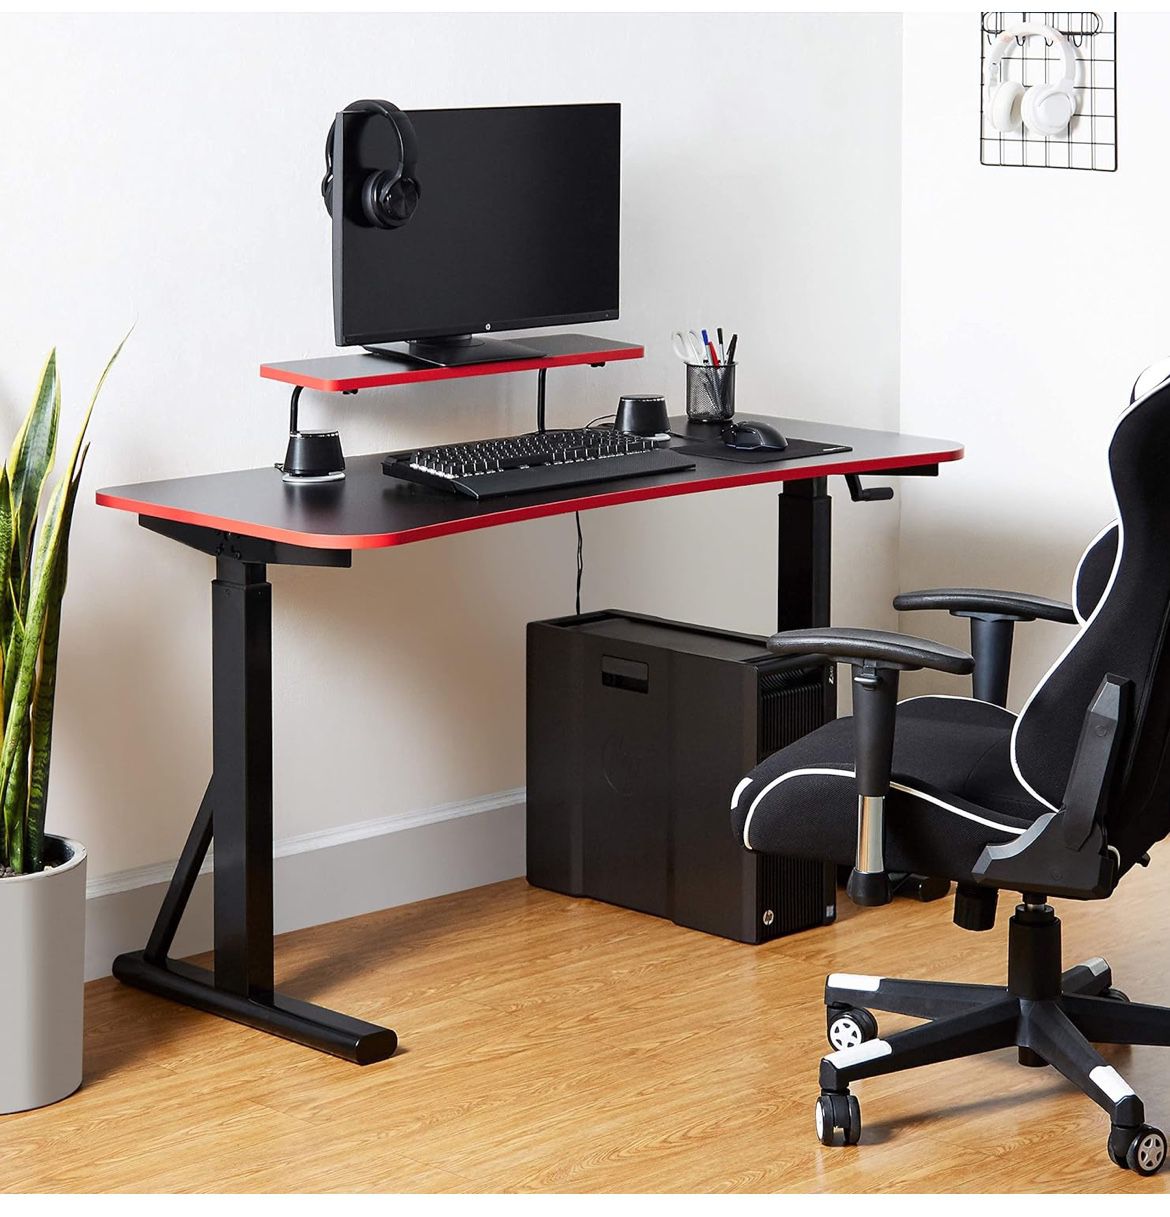 Manual Sit Stand Desk (55 Inches Wide) 